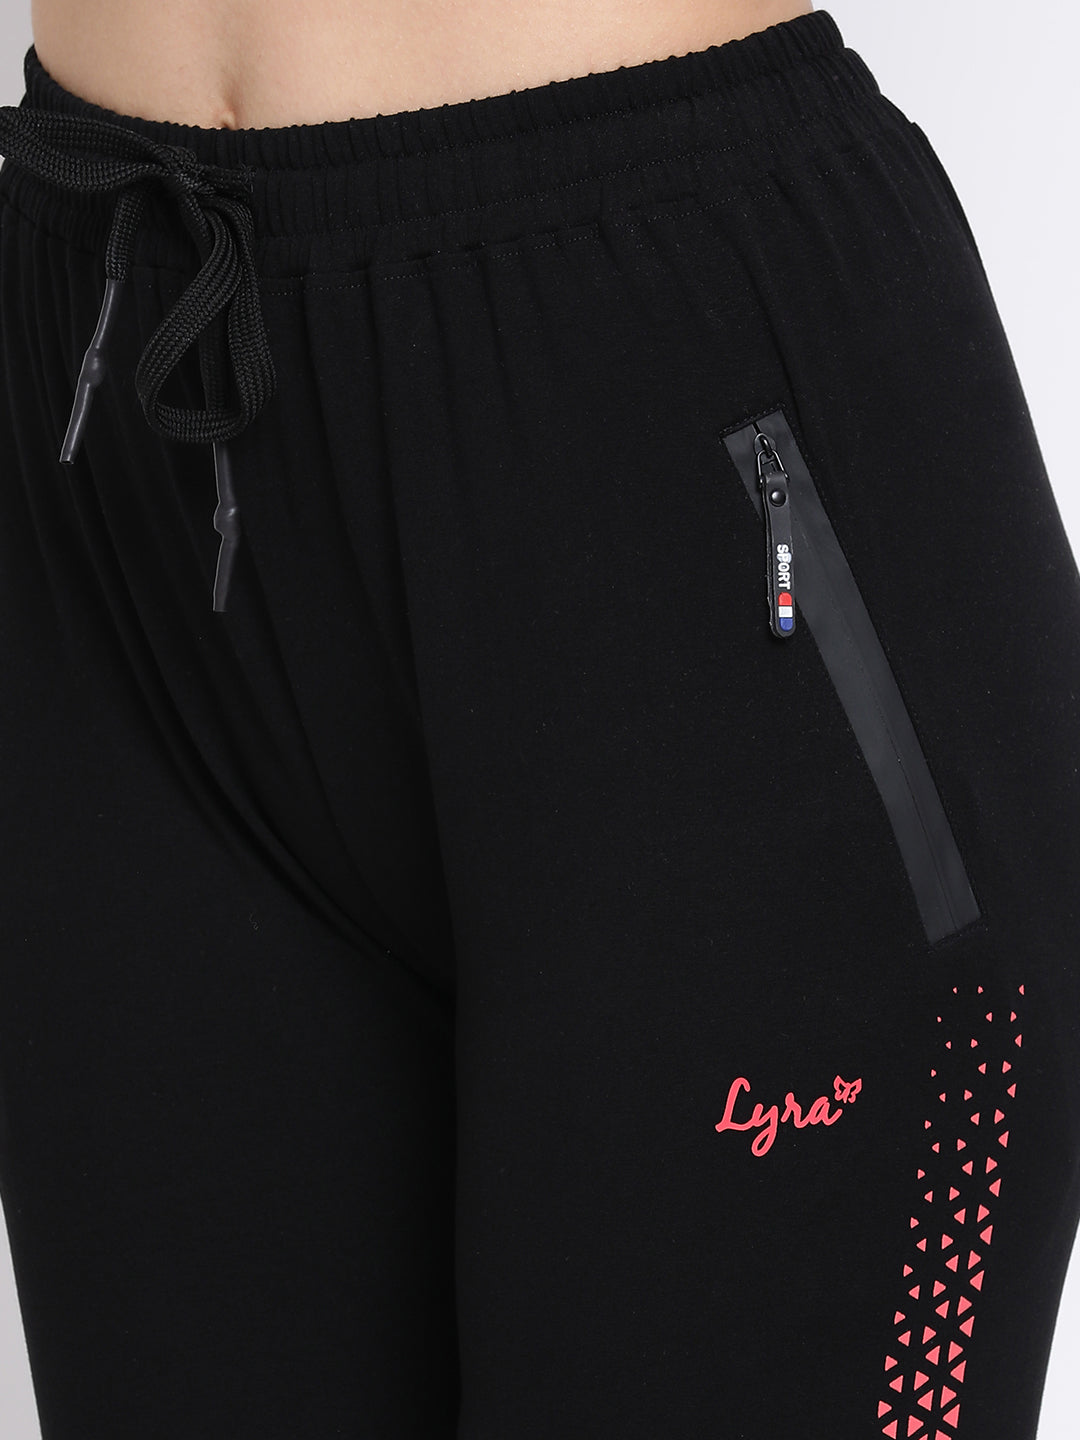 Buy Lux Lyra Grey Track Pants - Track Pants for Women 2037787 | Myntra